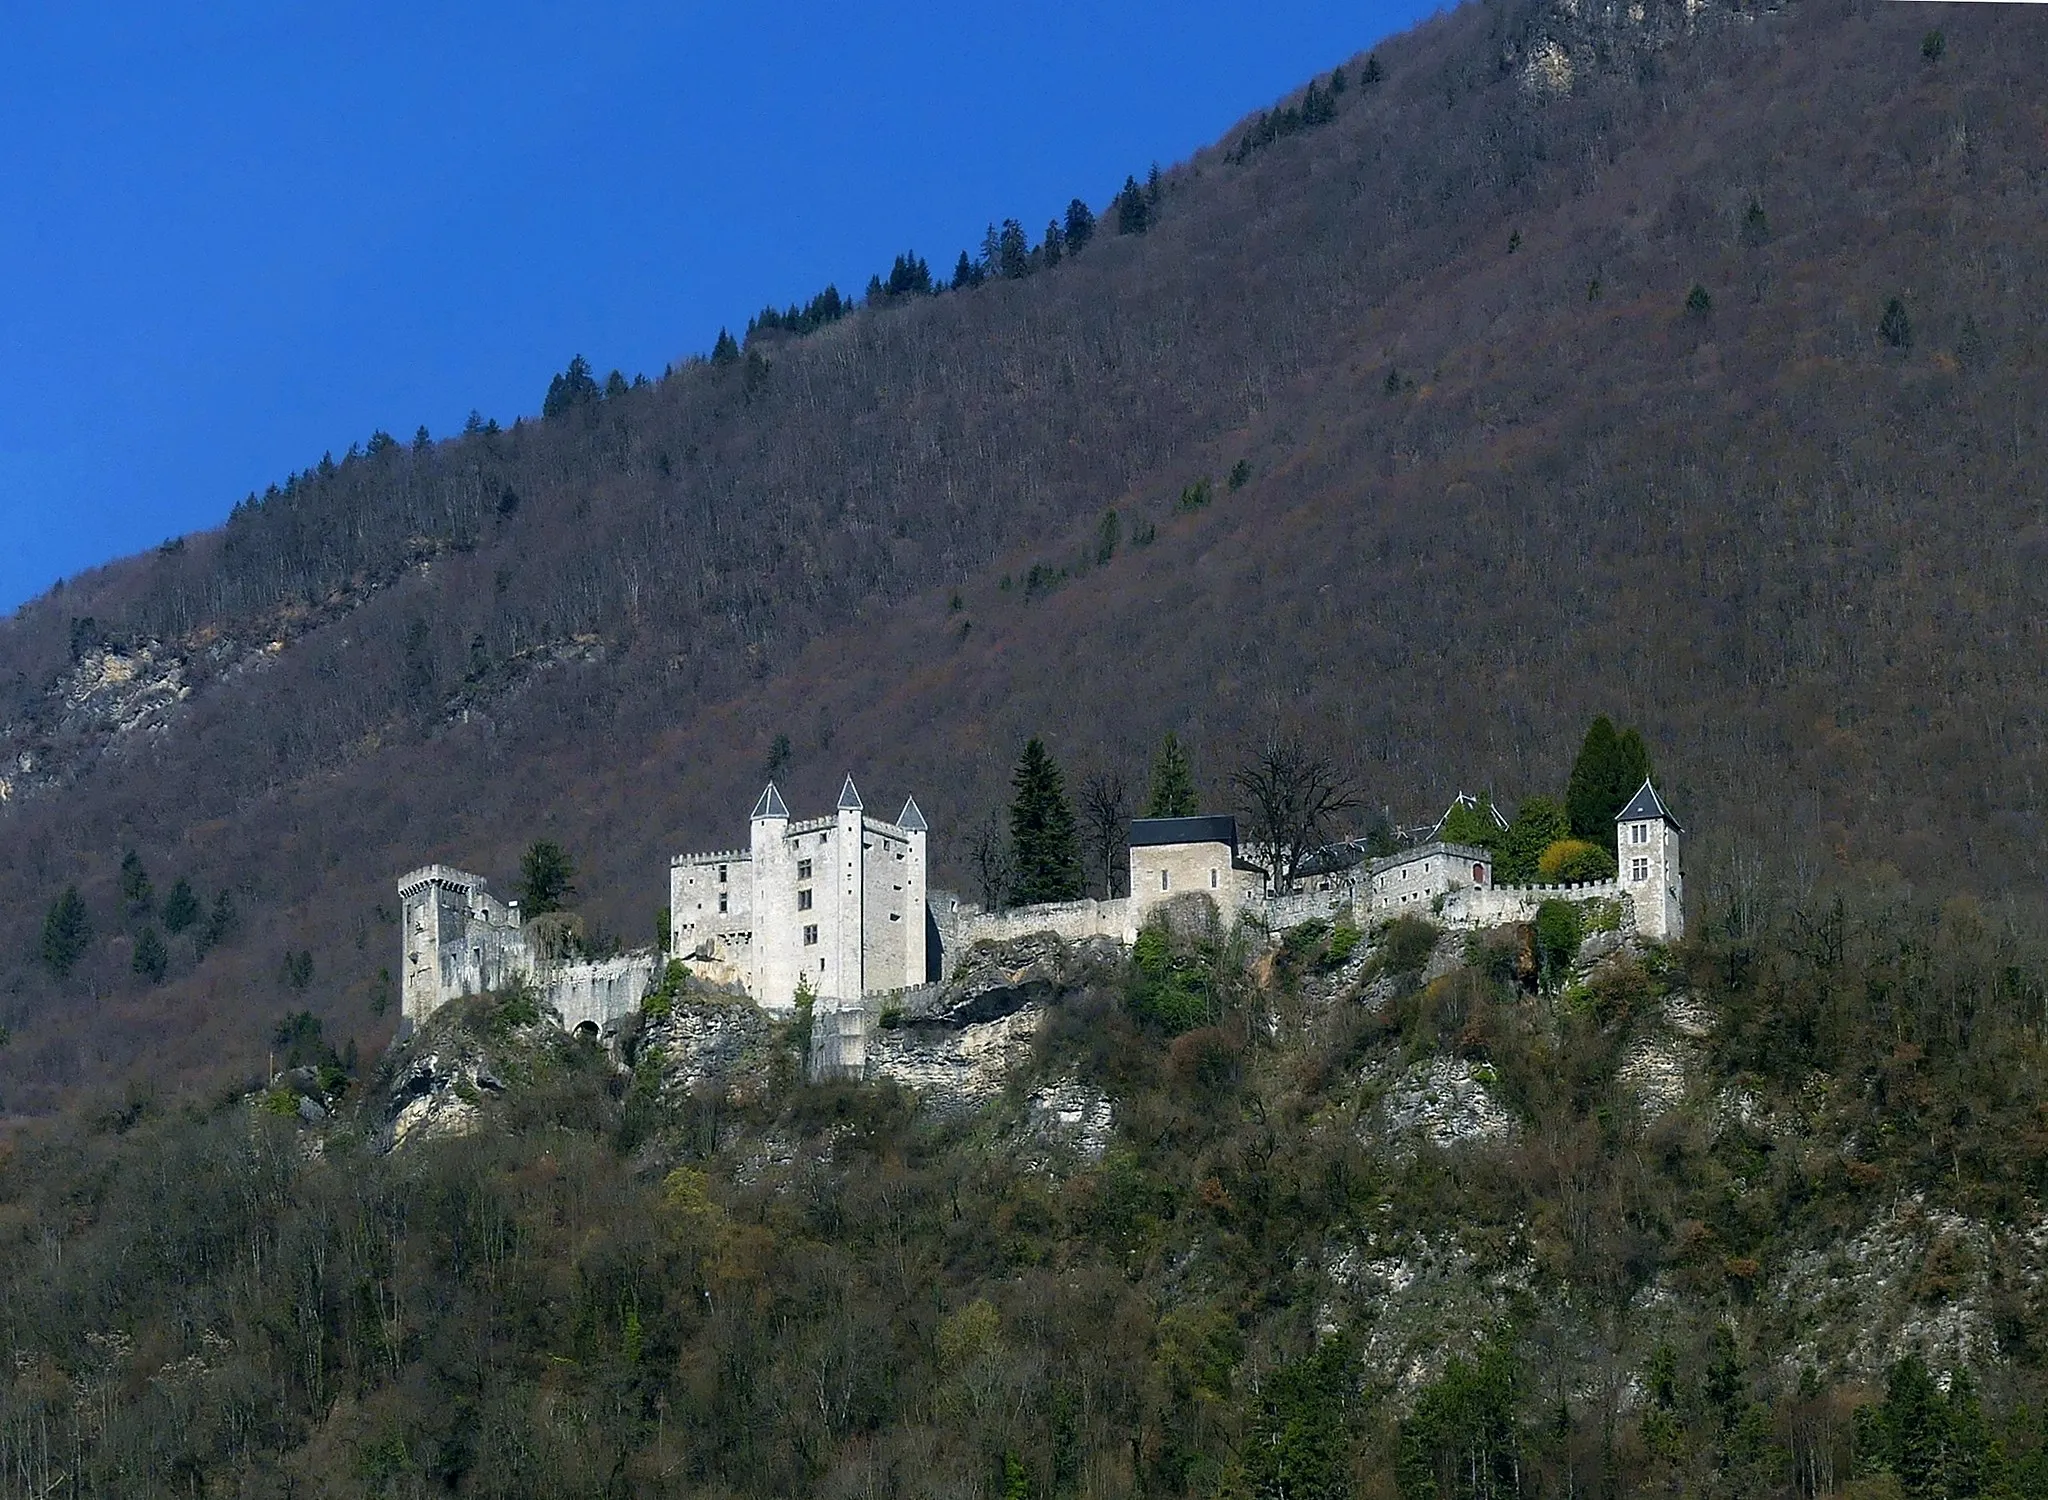 Photo showing: Sight, from the railway, of the château de Miolans castle, in Savoie, France.